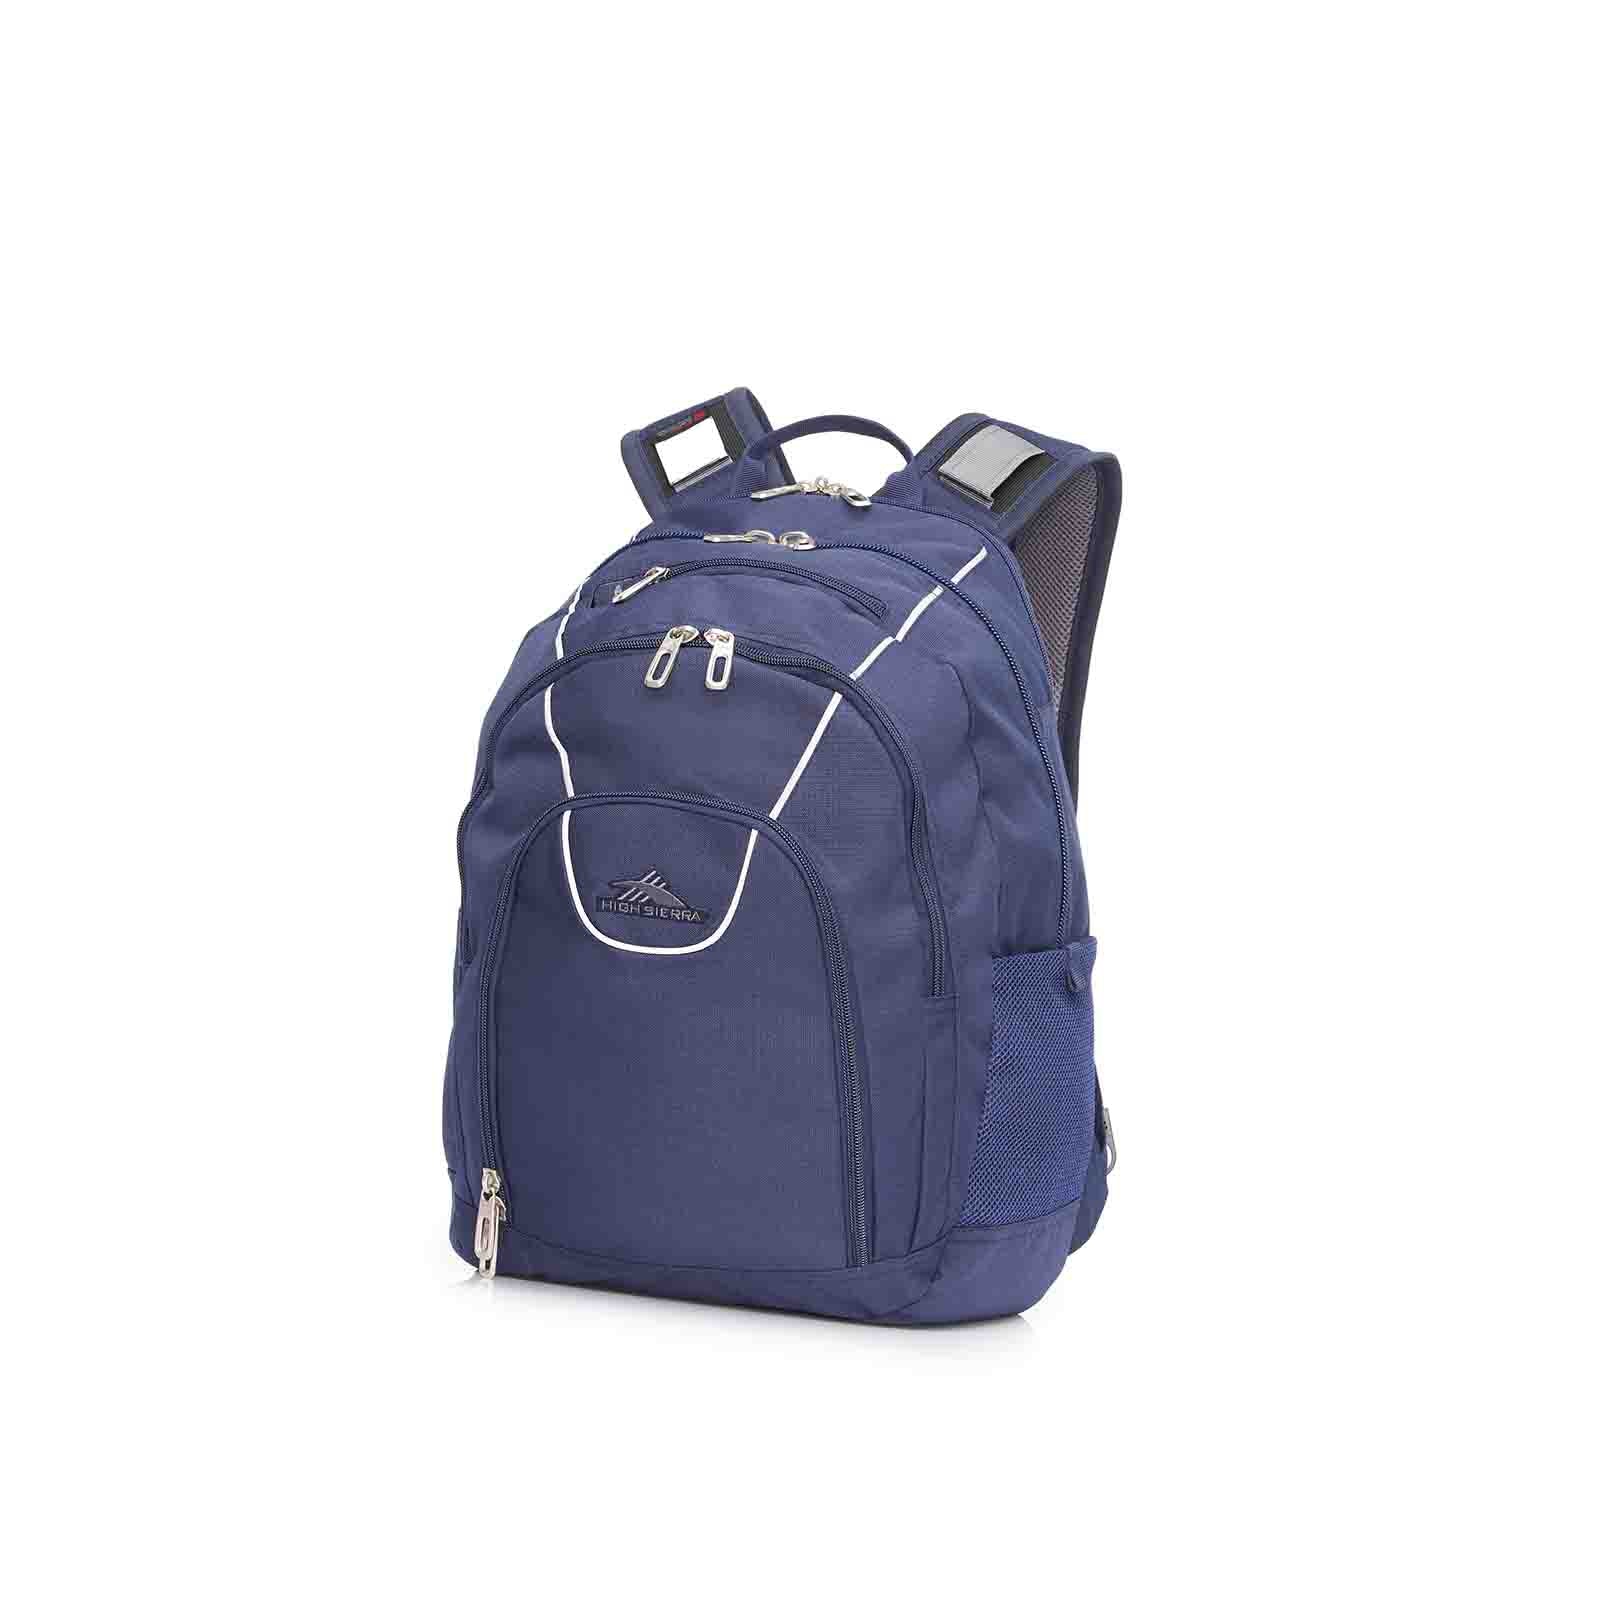 High-Sierra-Academy-3-Eco-15-Inch-Laptop-Backpack-Marine-Blue-Front-Angle